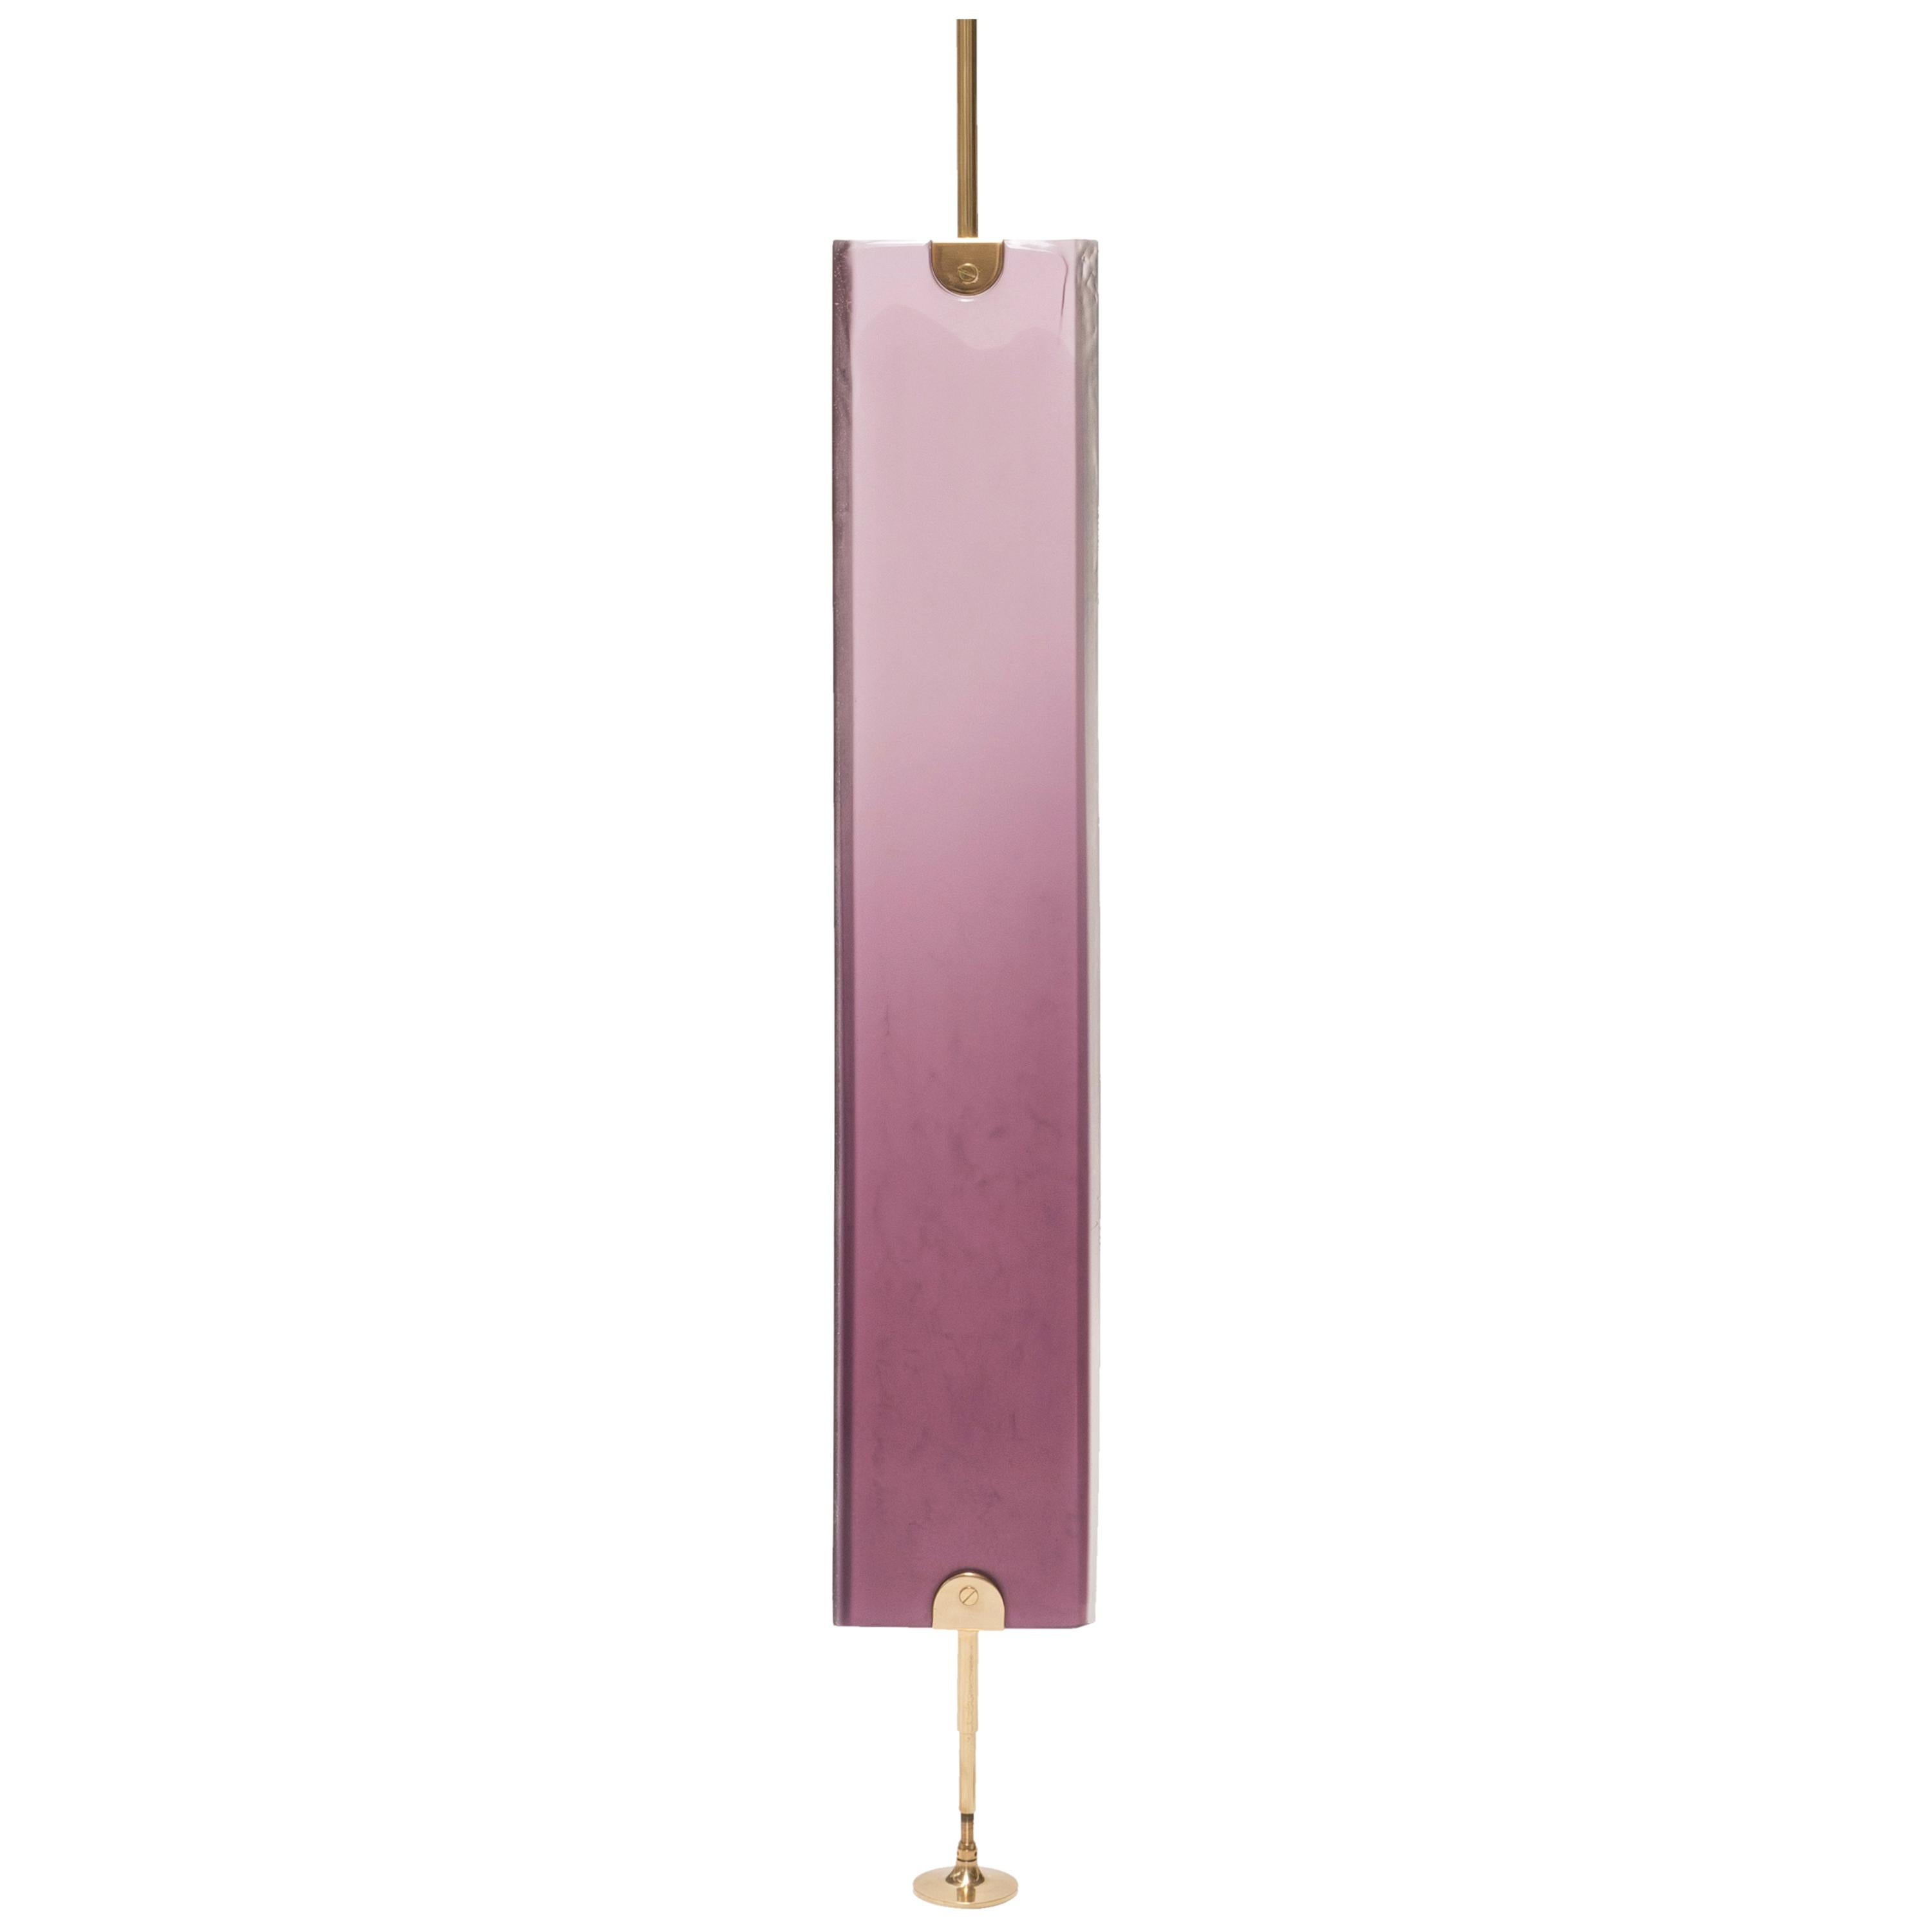 Reverso Separè REd Violet by Draga&Aurel Resin and Brass, 21st Century For Sale